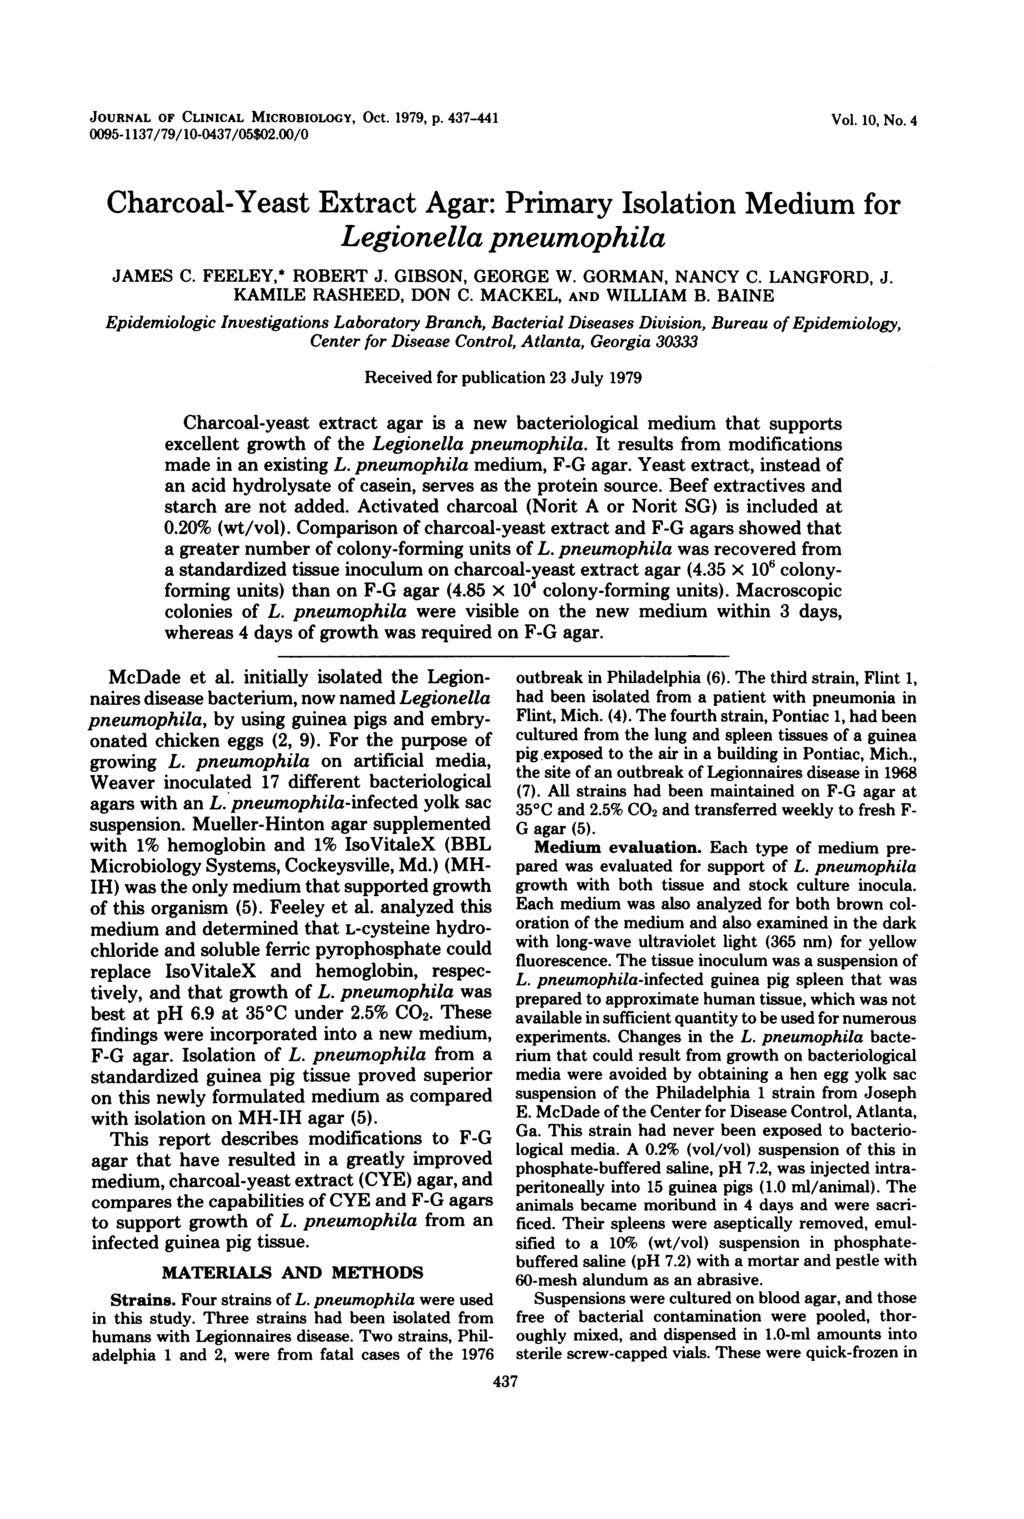 JOURNAL OF CLINICAL MICROBIOLOGY, Oct. 1979, p. 437-441 0095-1137/79/10-0437/05$02.00/0 Vol. 10, No. 4 Charcoal-Yeast Extract Agar: Primary Isolation Medium for Legionella pneumophila JAMES C.